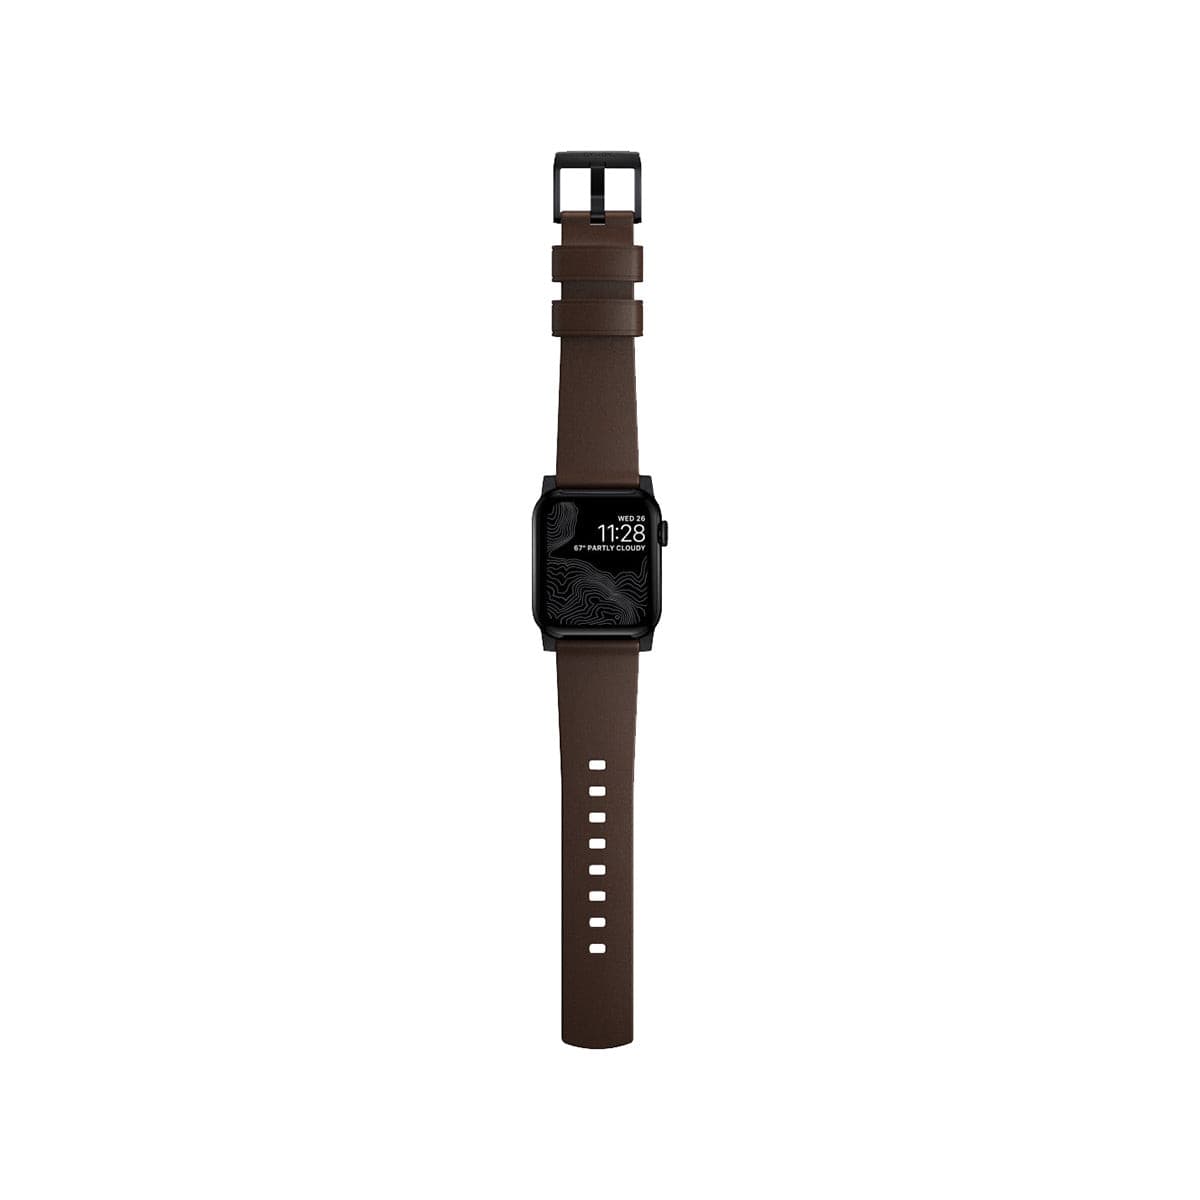 NOMAD Apple Watch Modern Band 45mm - Black Hardware with Brown Nomal Leather Strap.